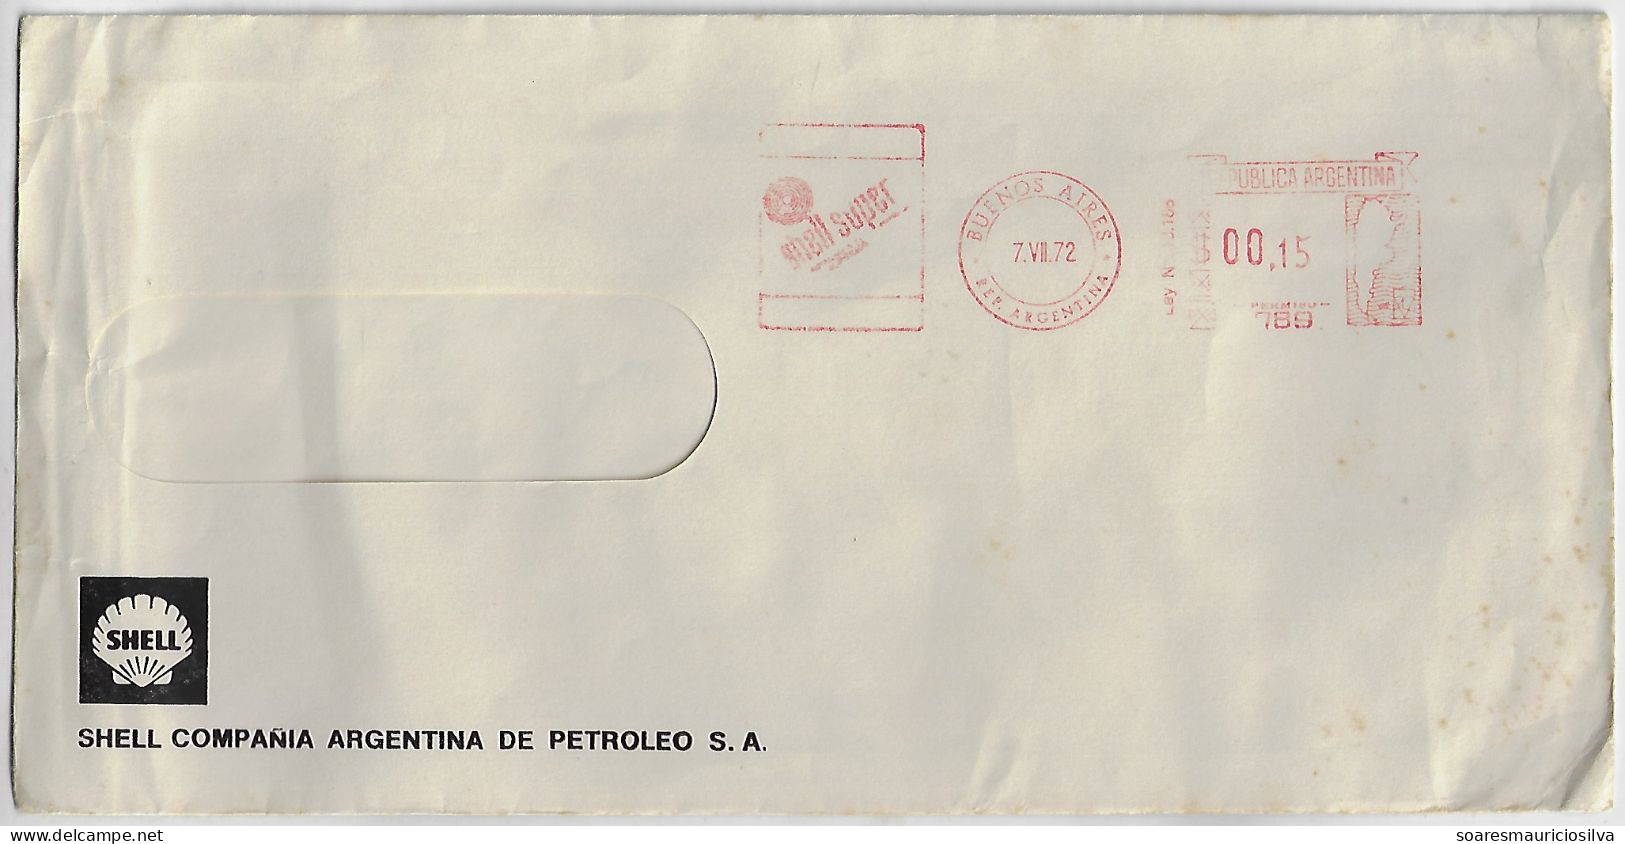 Argentina 1972 Commercial Cover From Buenos Aires Meter Stamp Hasler F66/F88 Slogan Shell Super Gas Gasoline Fuel Oil - Gaz